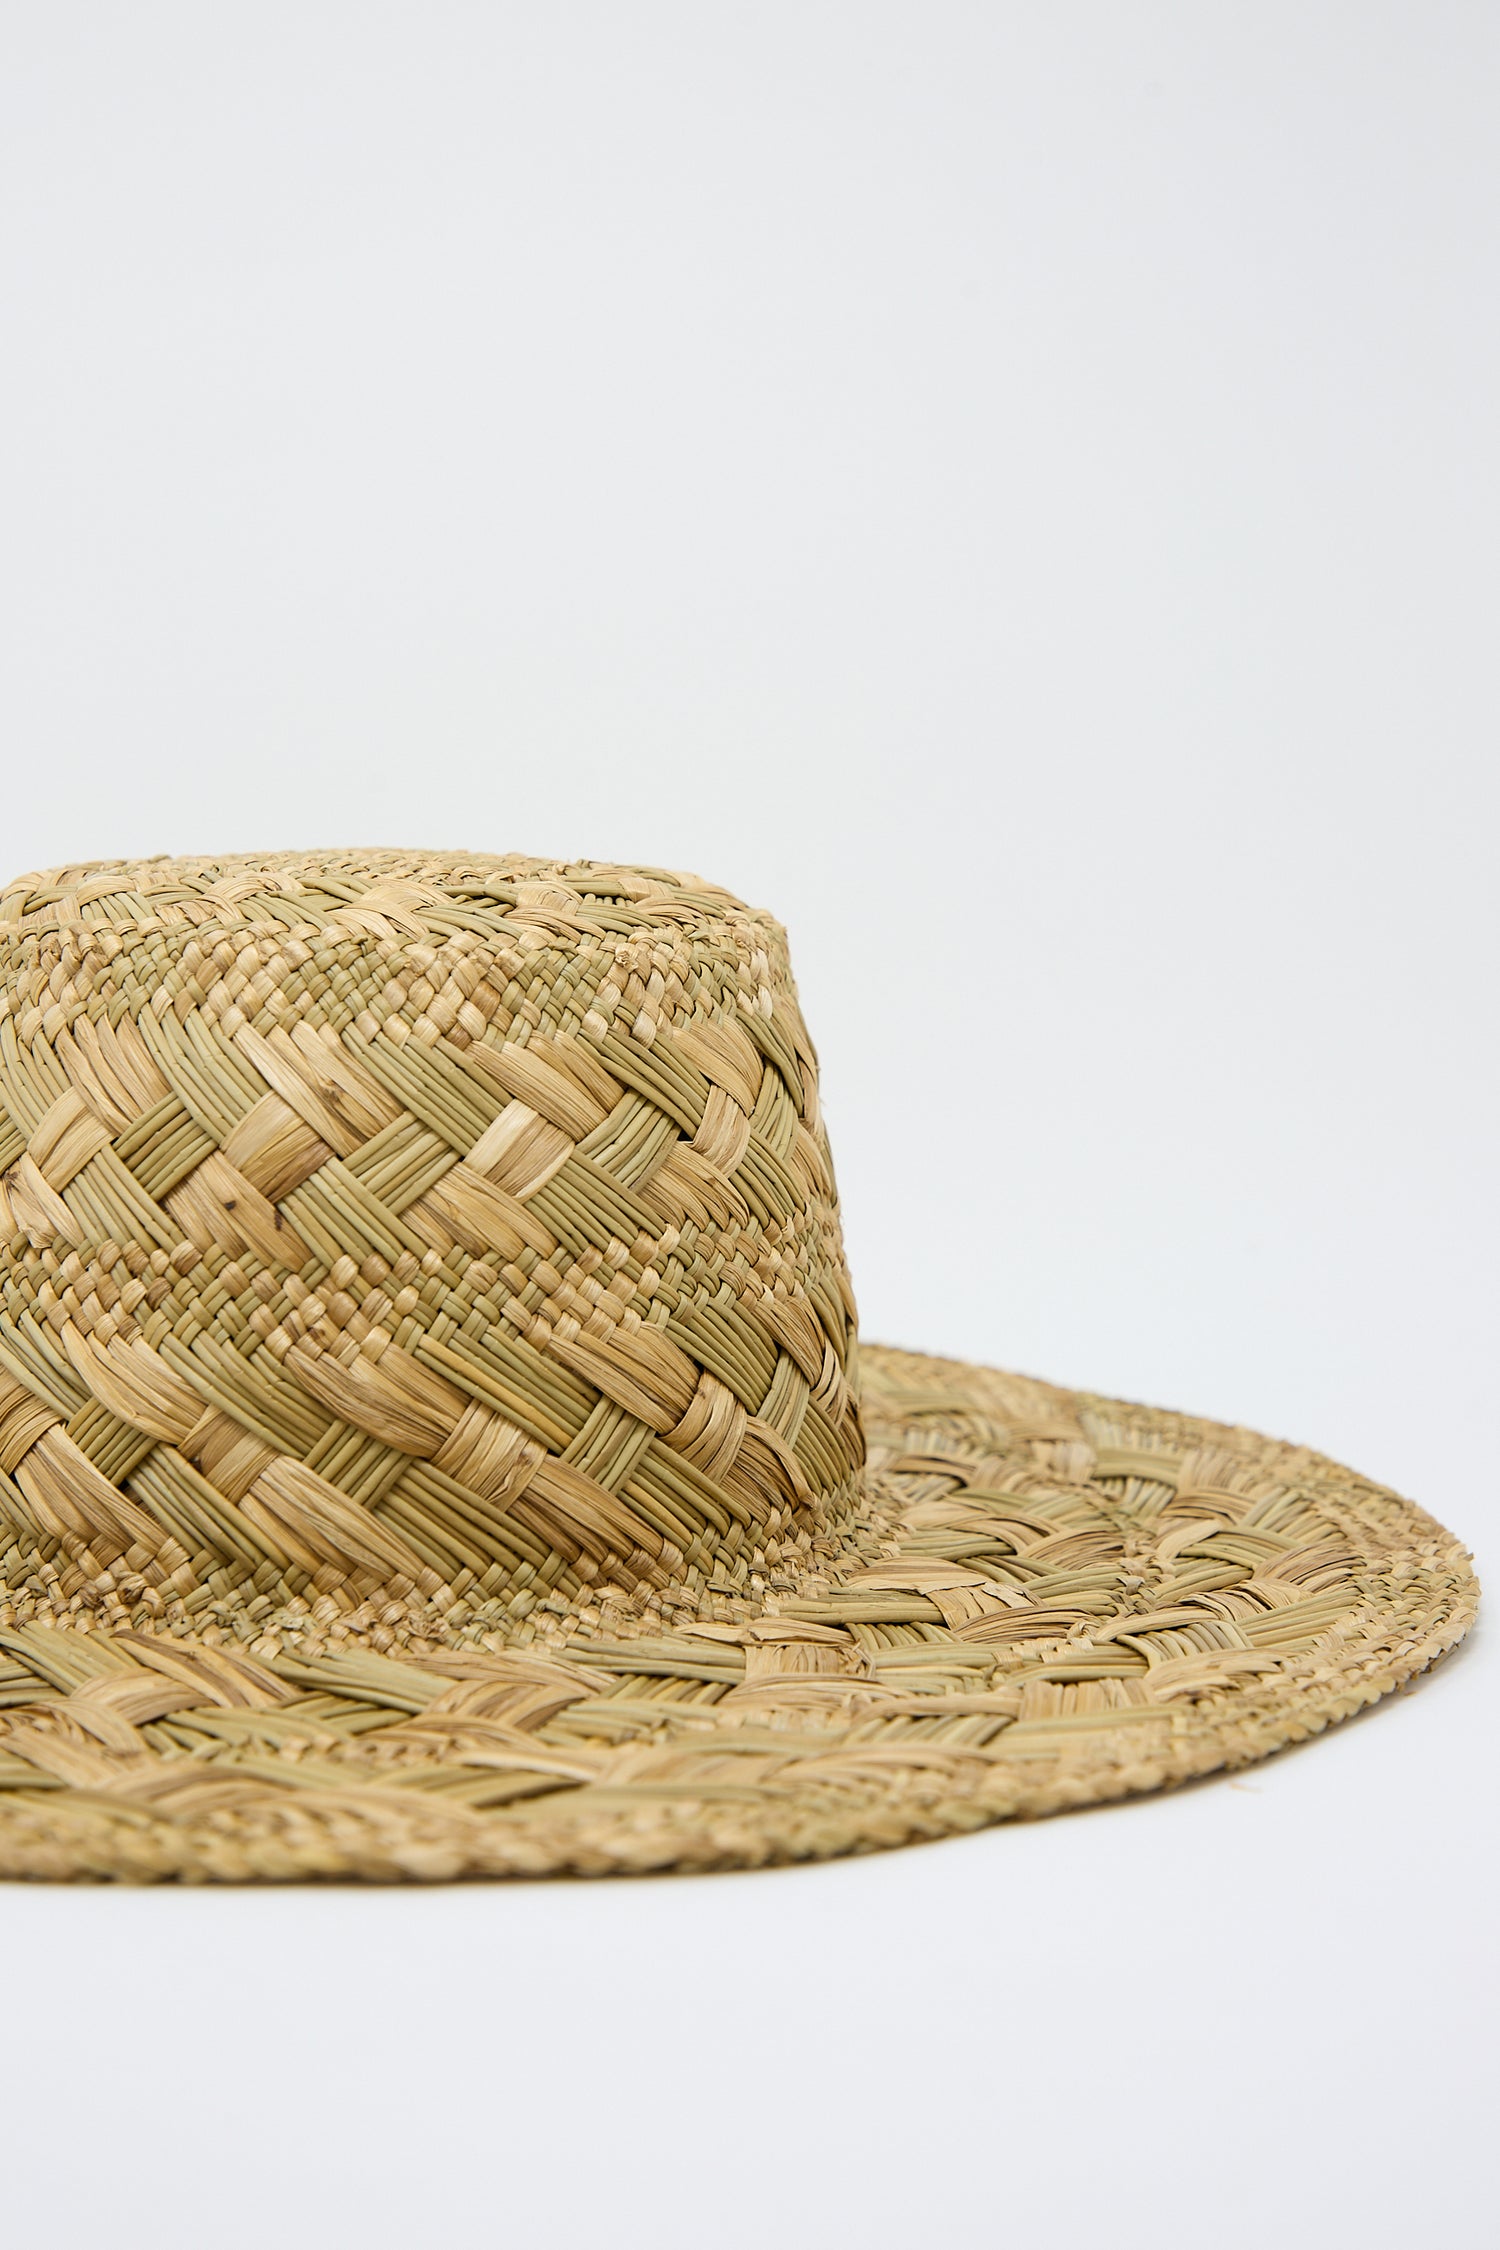 A close-up of a Reinhard Plank Treccia Lai Straw Hat in Natural against a plain white background, showing detailed texture.